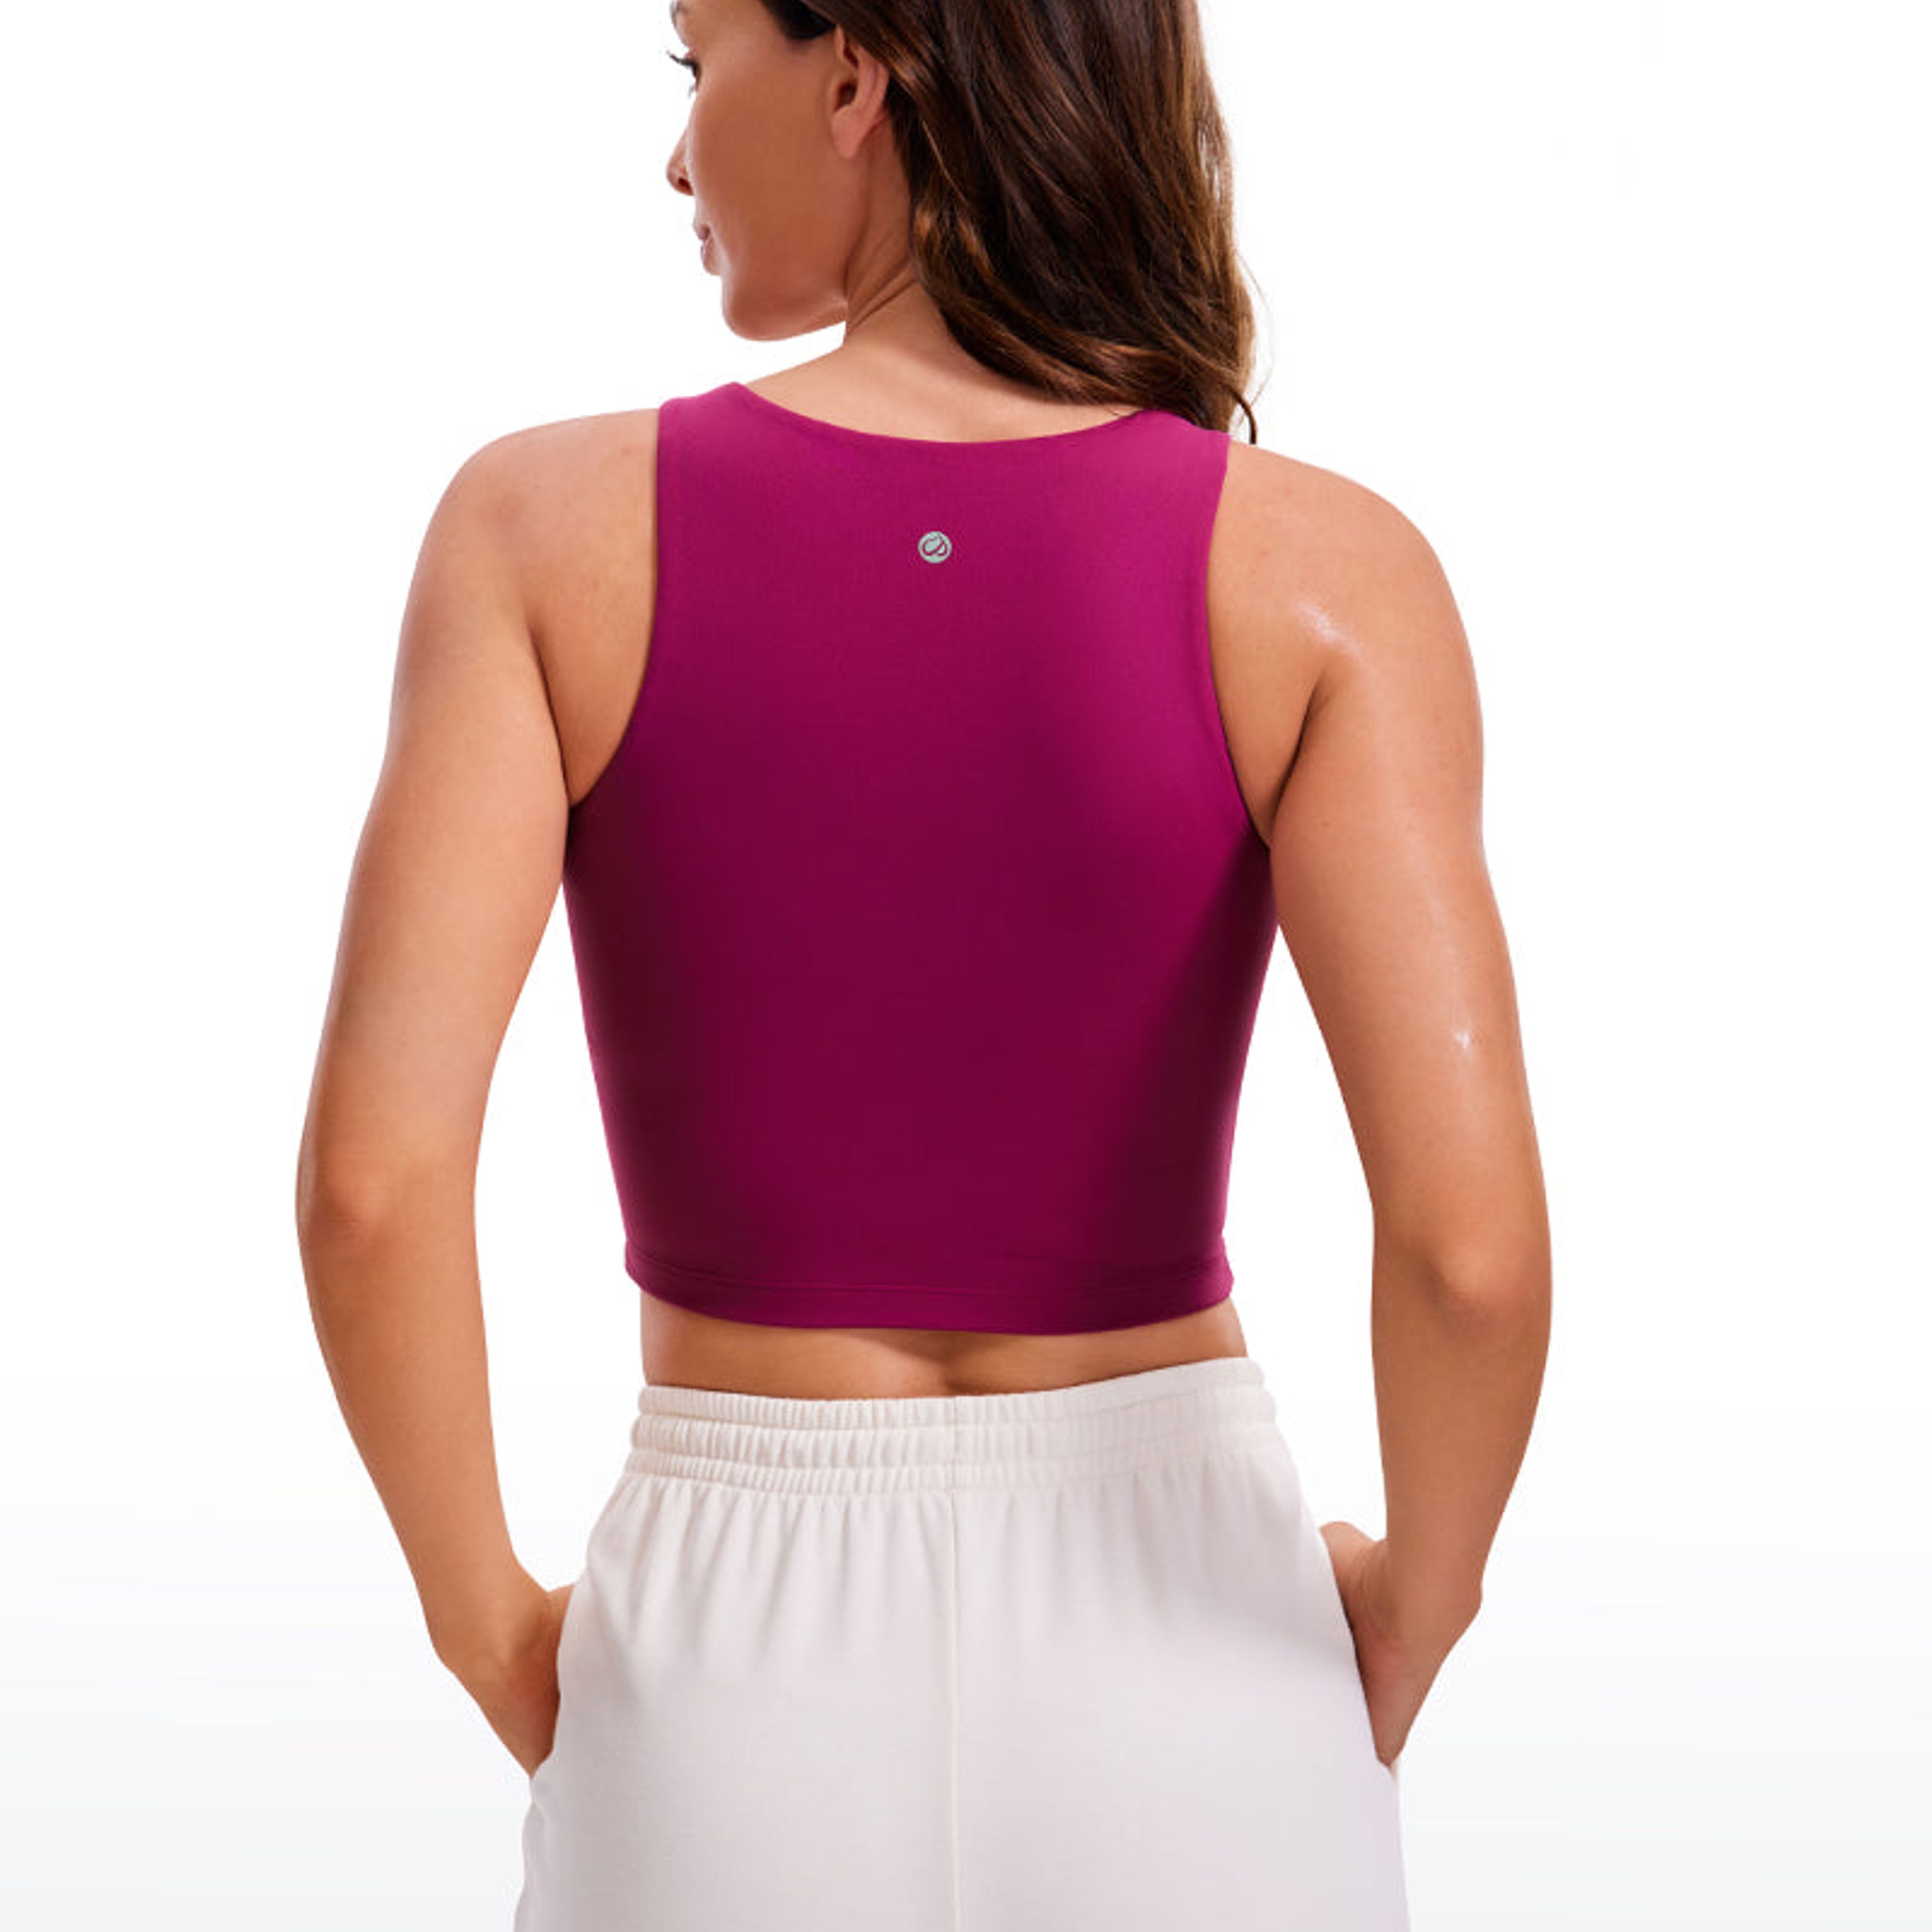 Crz Yoga Butterluxe Cropped High Neck Tank Tops Wide Back on